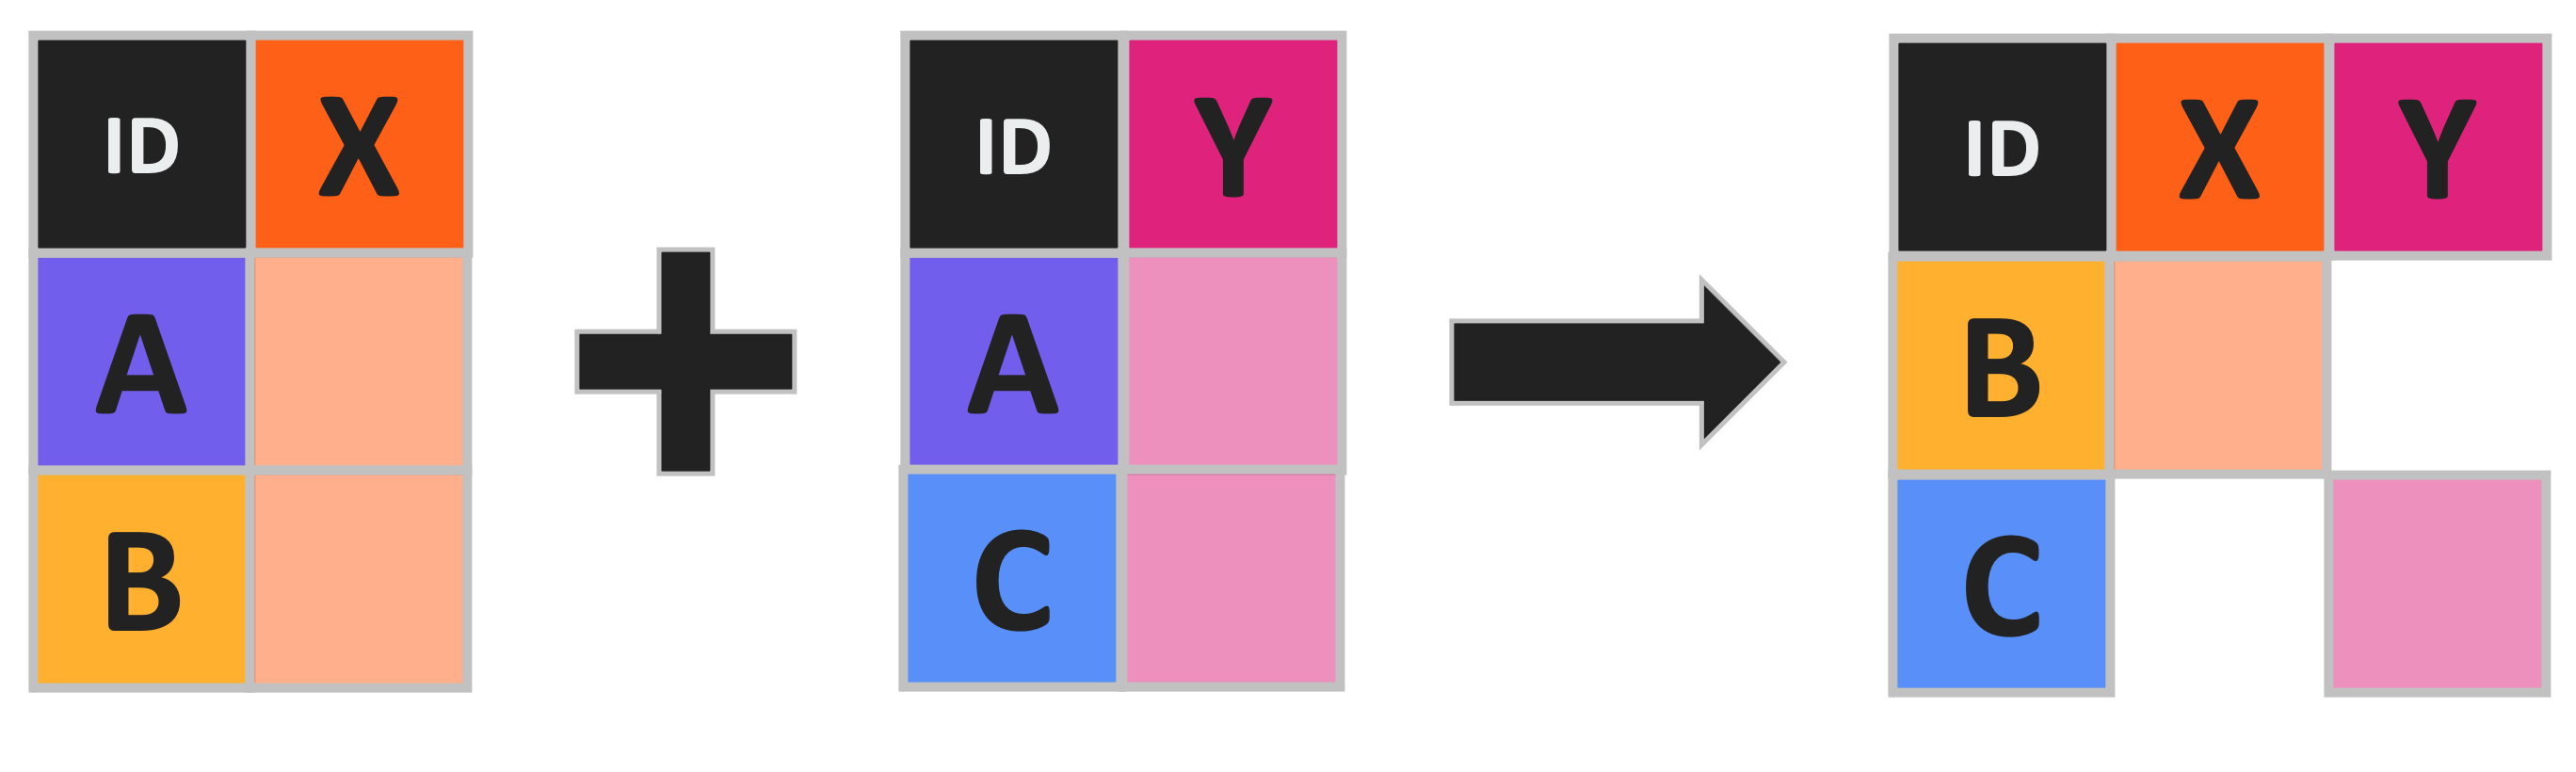 Table with an 'X' column and 'A' and 'B' rows gets joined with a second table with a 'Y' column and 'A' and 'C' rows to produce a single table with 'X' and Y' columns 'B' and 'C' rows